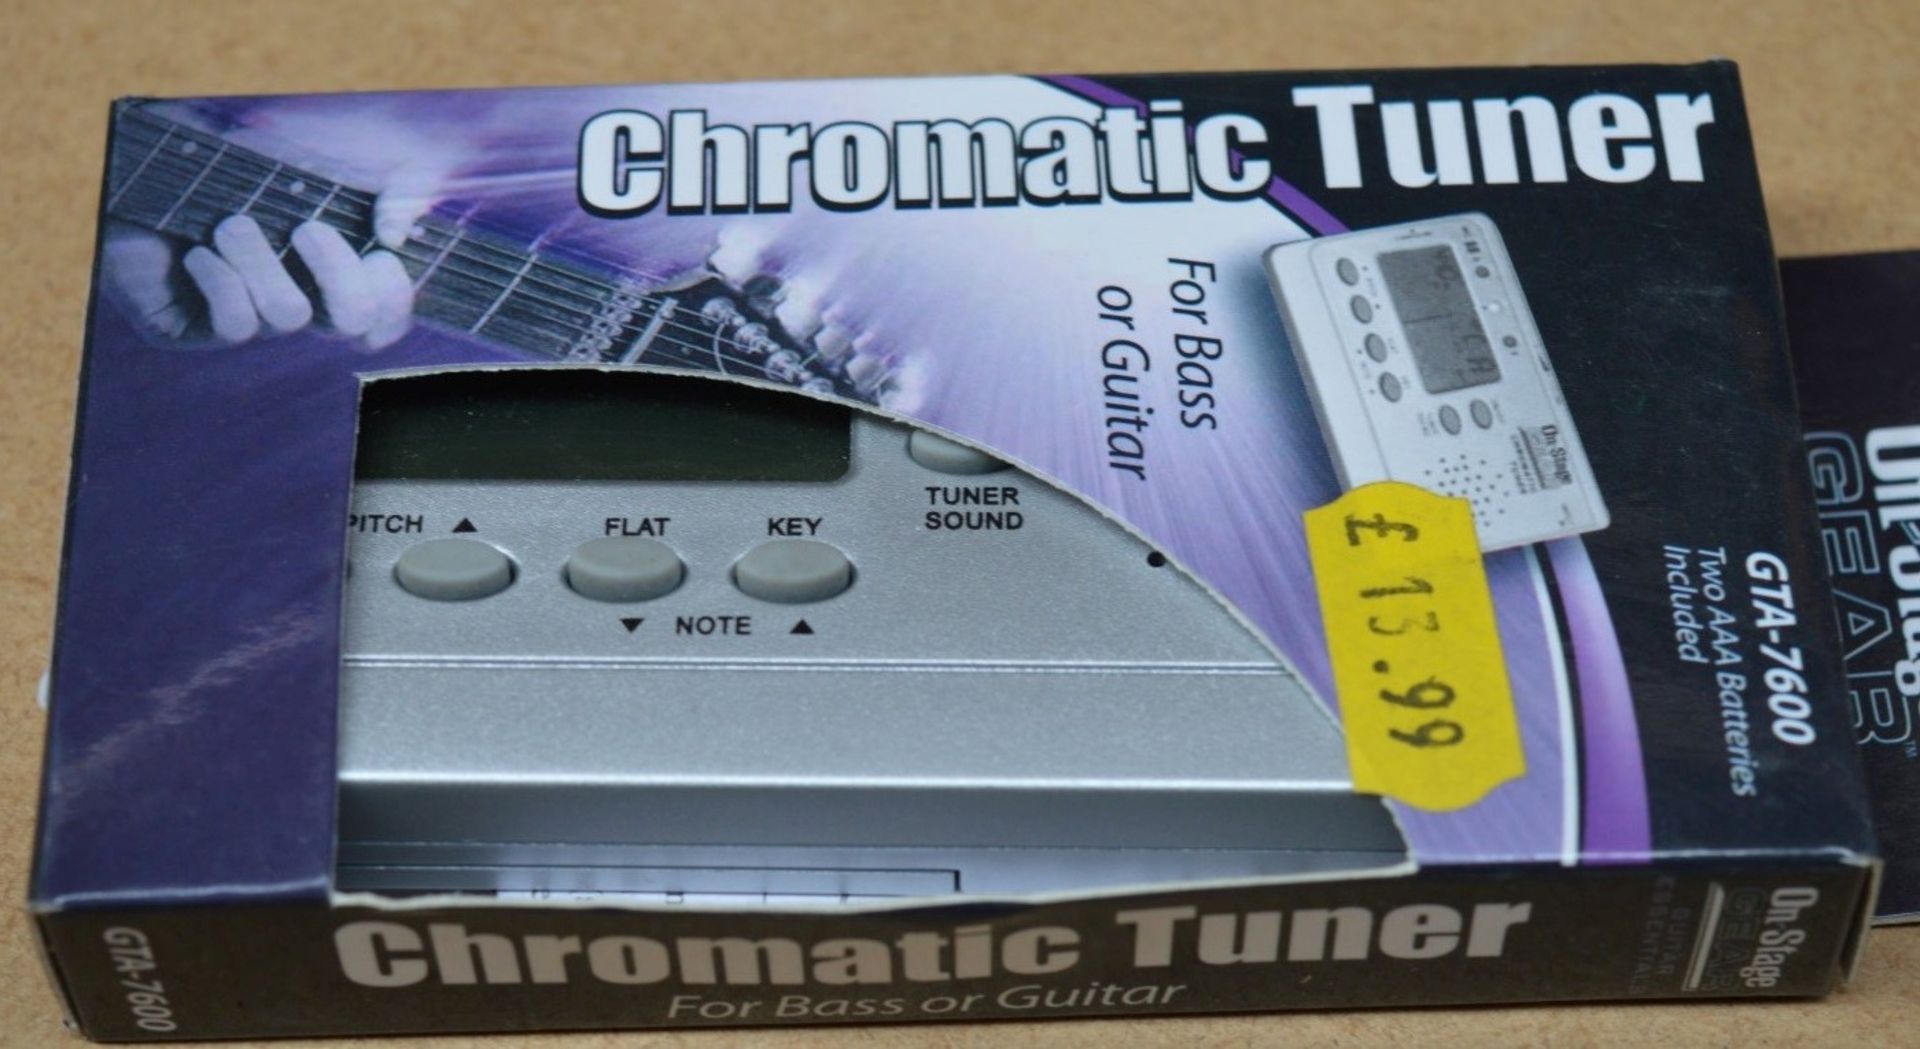 2 x On-Stage Gear GTA-7600 Guitar & Bass Chromatic Tuners - New and Boxed - CL020 - Location: - Image 2 of 2